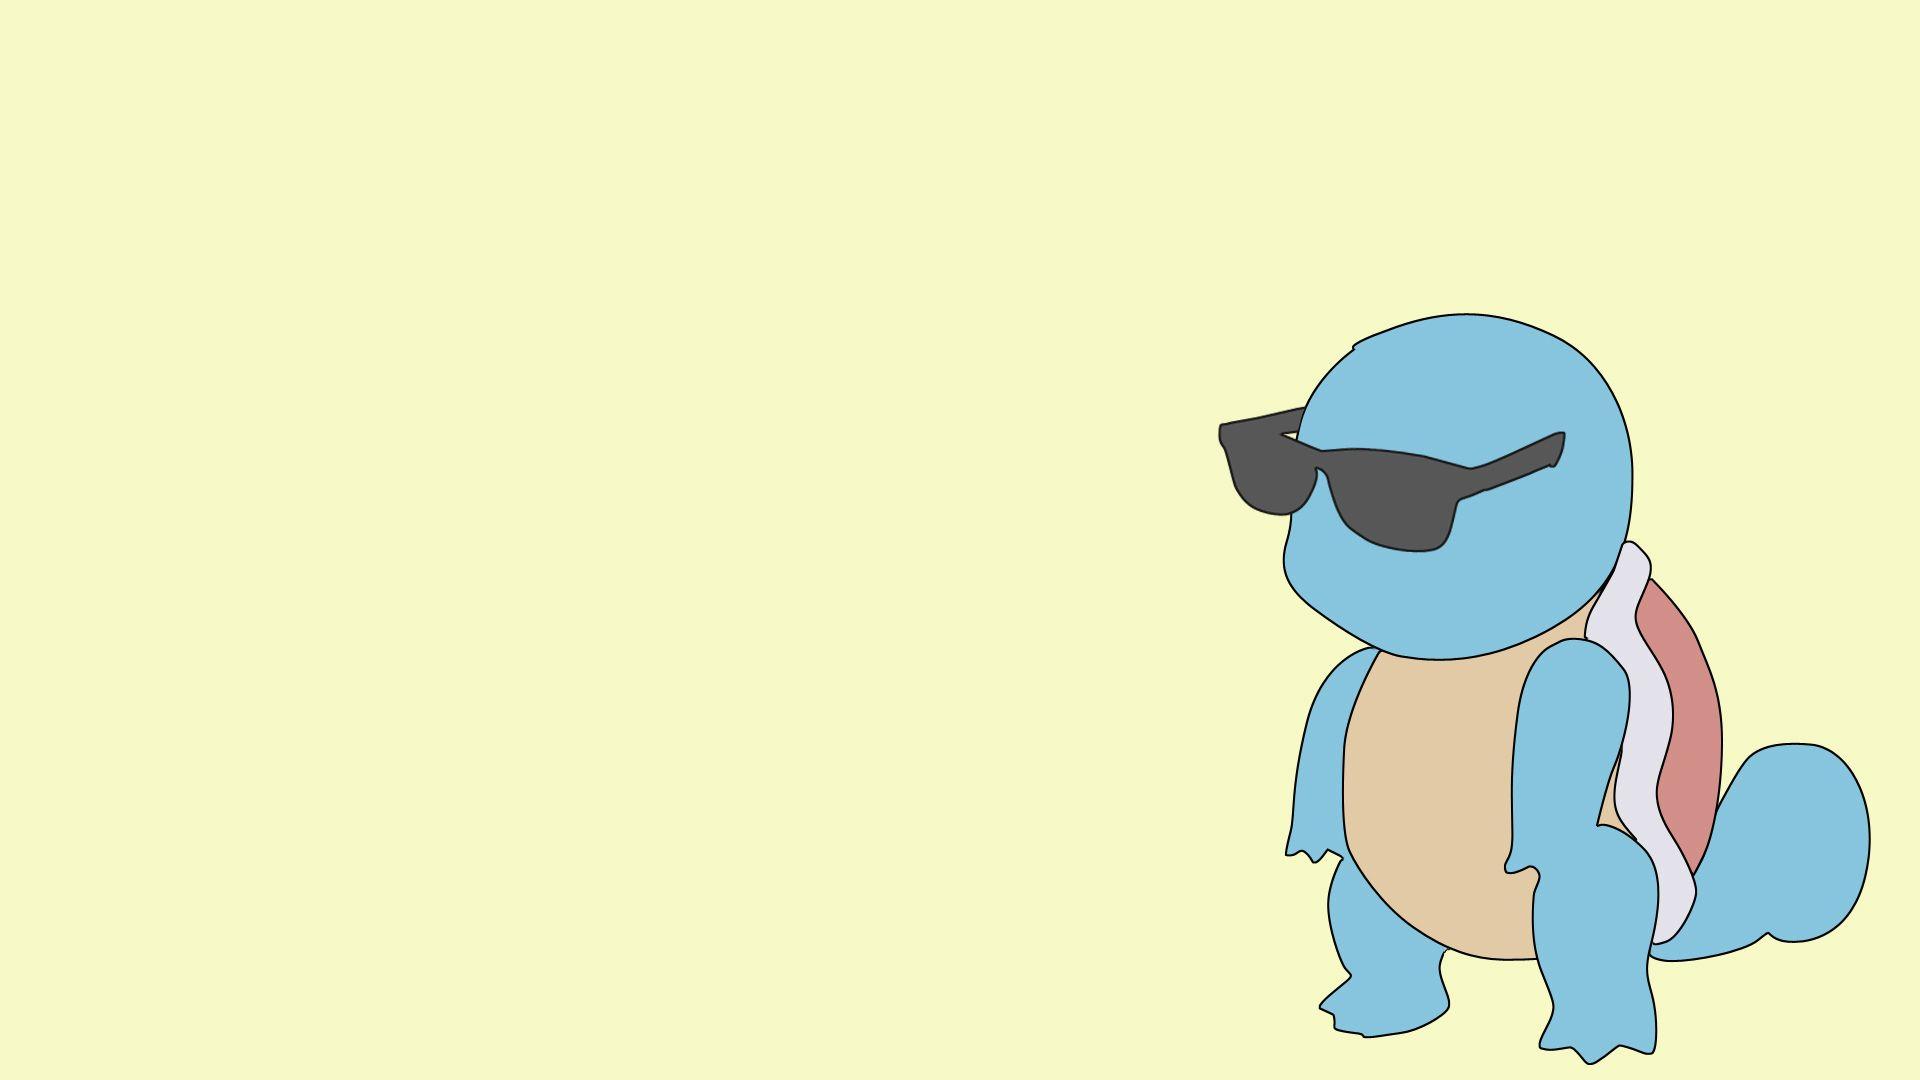 Squirtle Squad Wallpapers  Top Free Squirtle Squad Backgrounds   WallpaperAccess